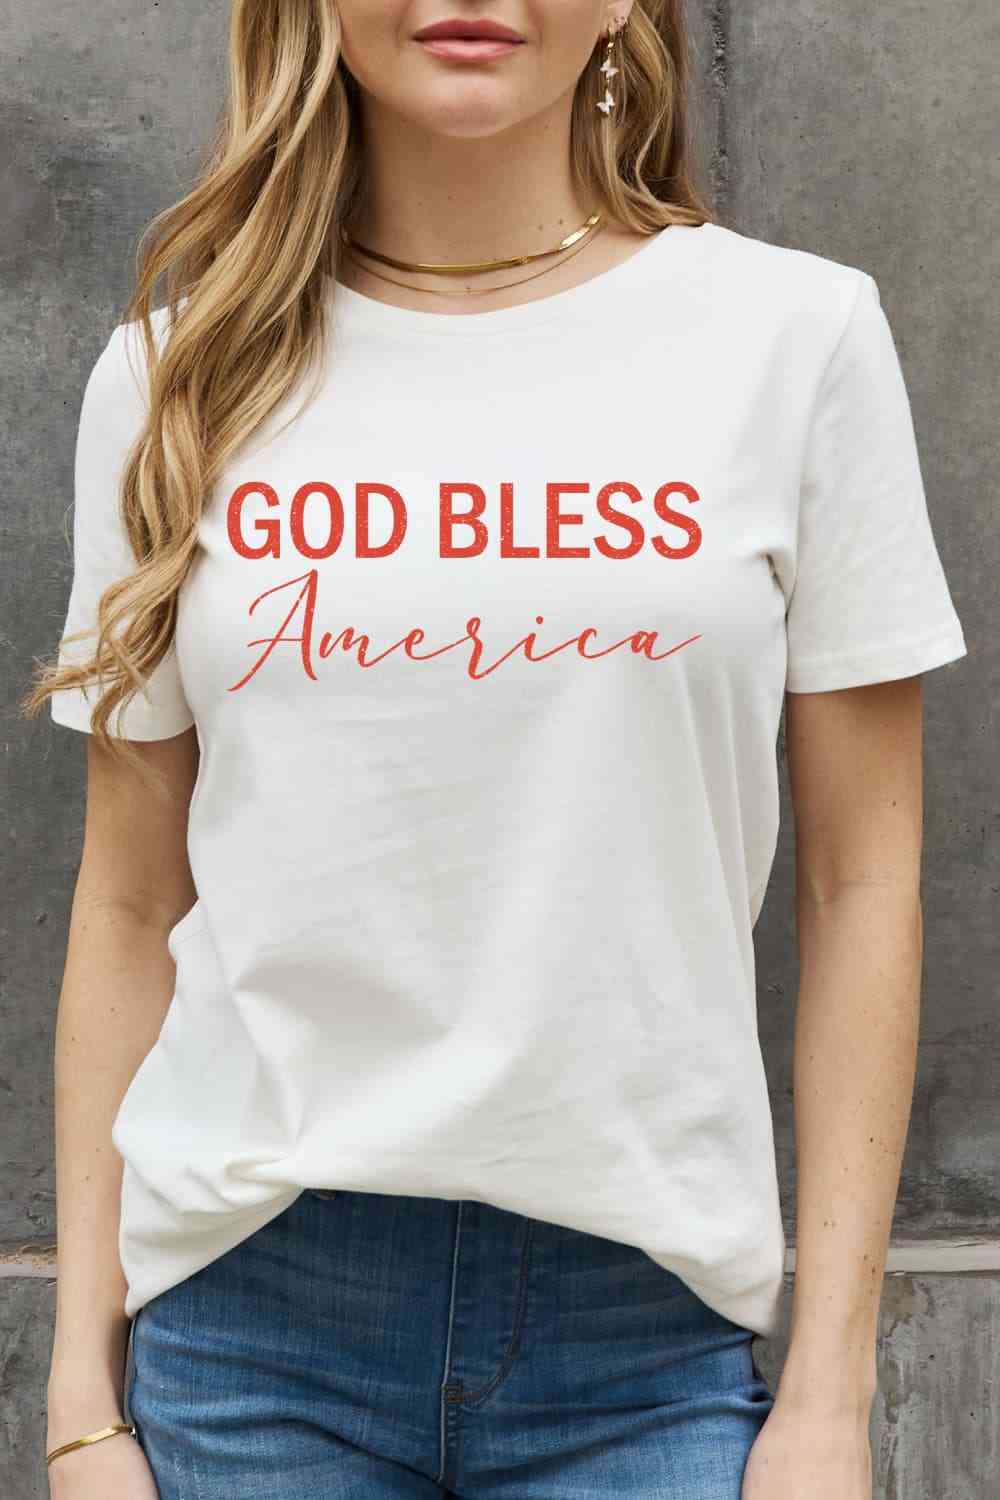 Simply Love GOD BLESS AMERICA Graphic Cotton Tee Bleach S 